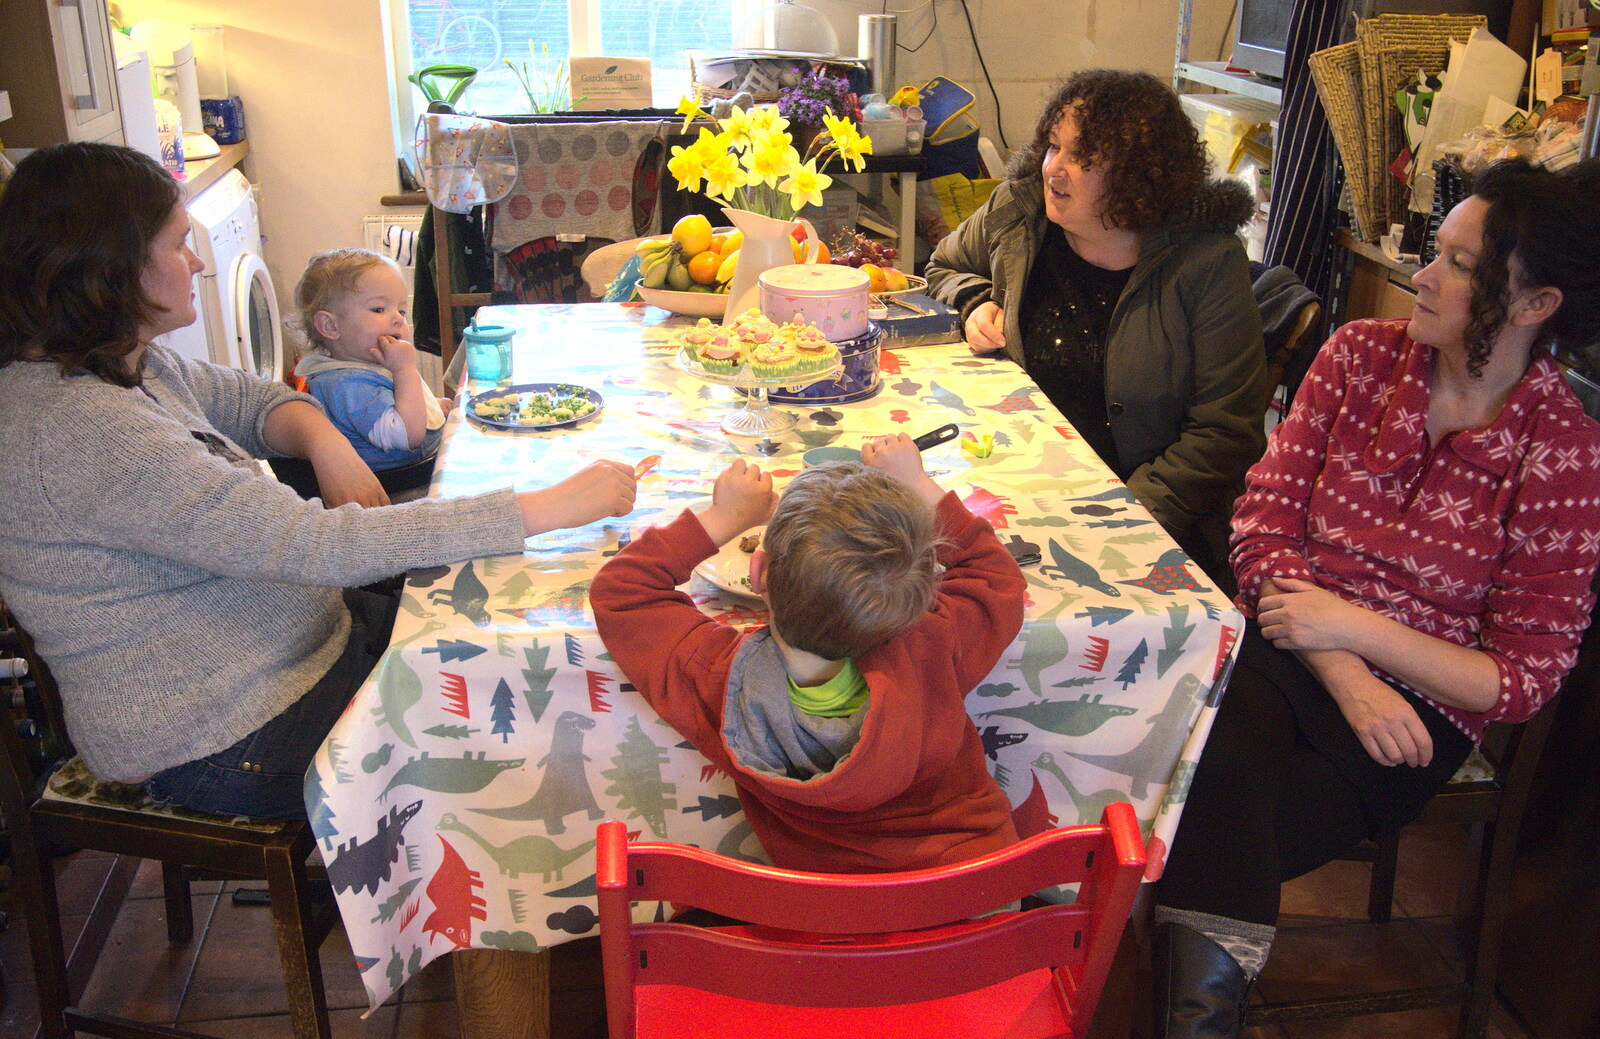 We hang out around the kitchen table from An Easter Visit from Da Gorls, Brome, Suffolk - 2nd April 2013